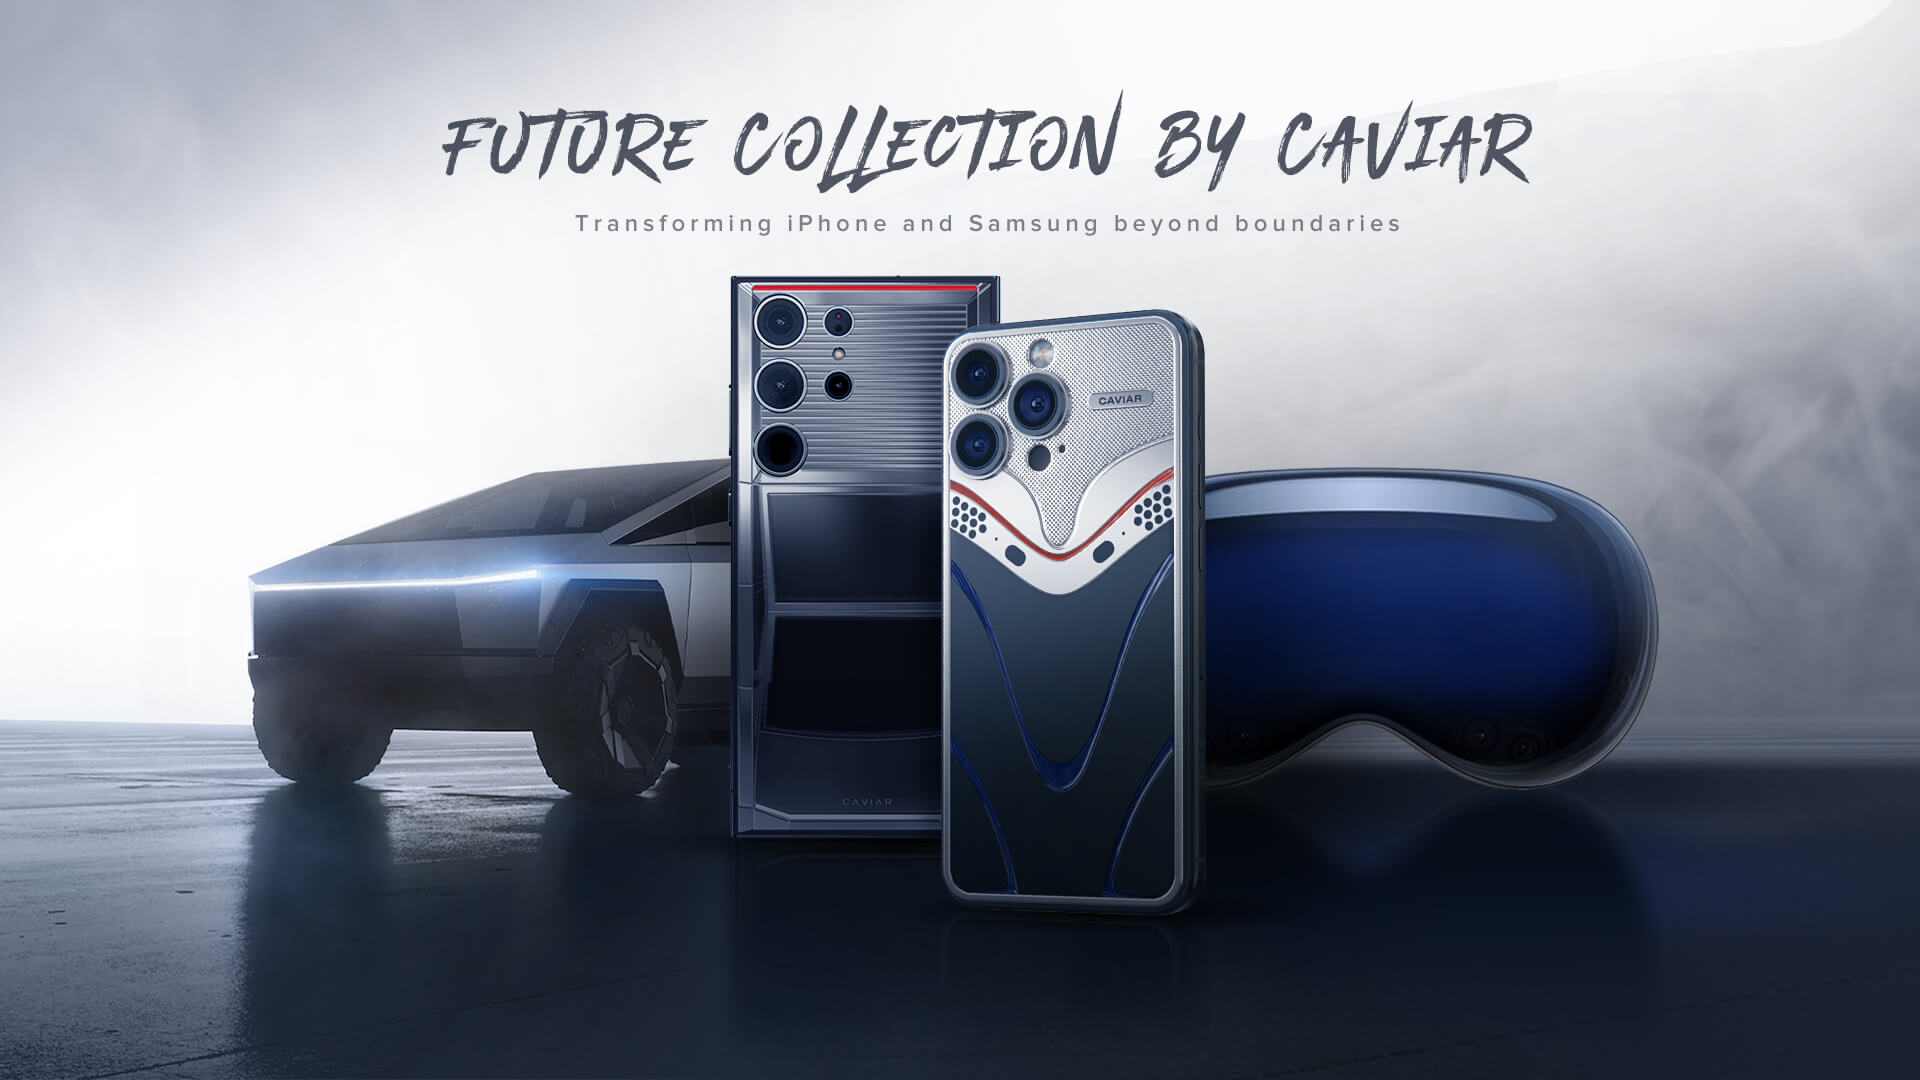 Caviar unveiled a collection of futuristic iPhone and Samsung inspired by Apple Vision Pro and Tesla Cybertruck